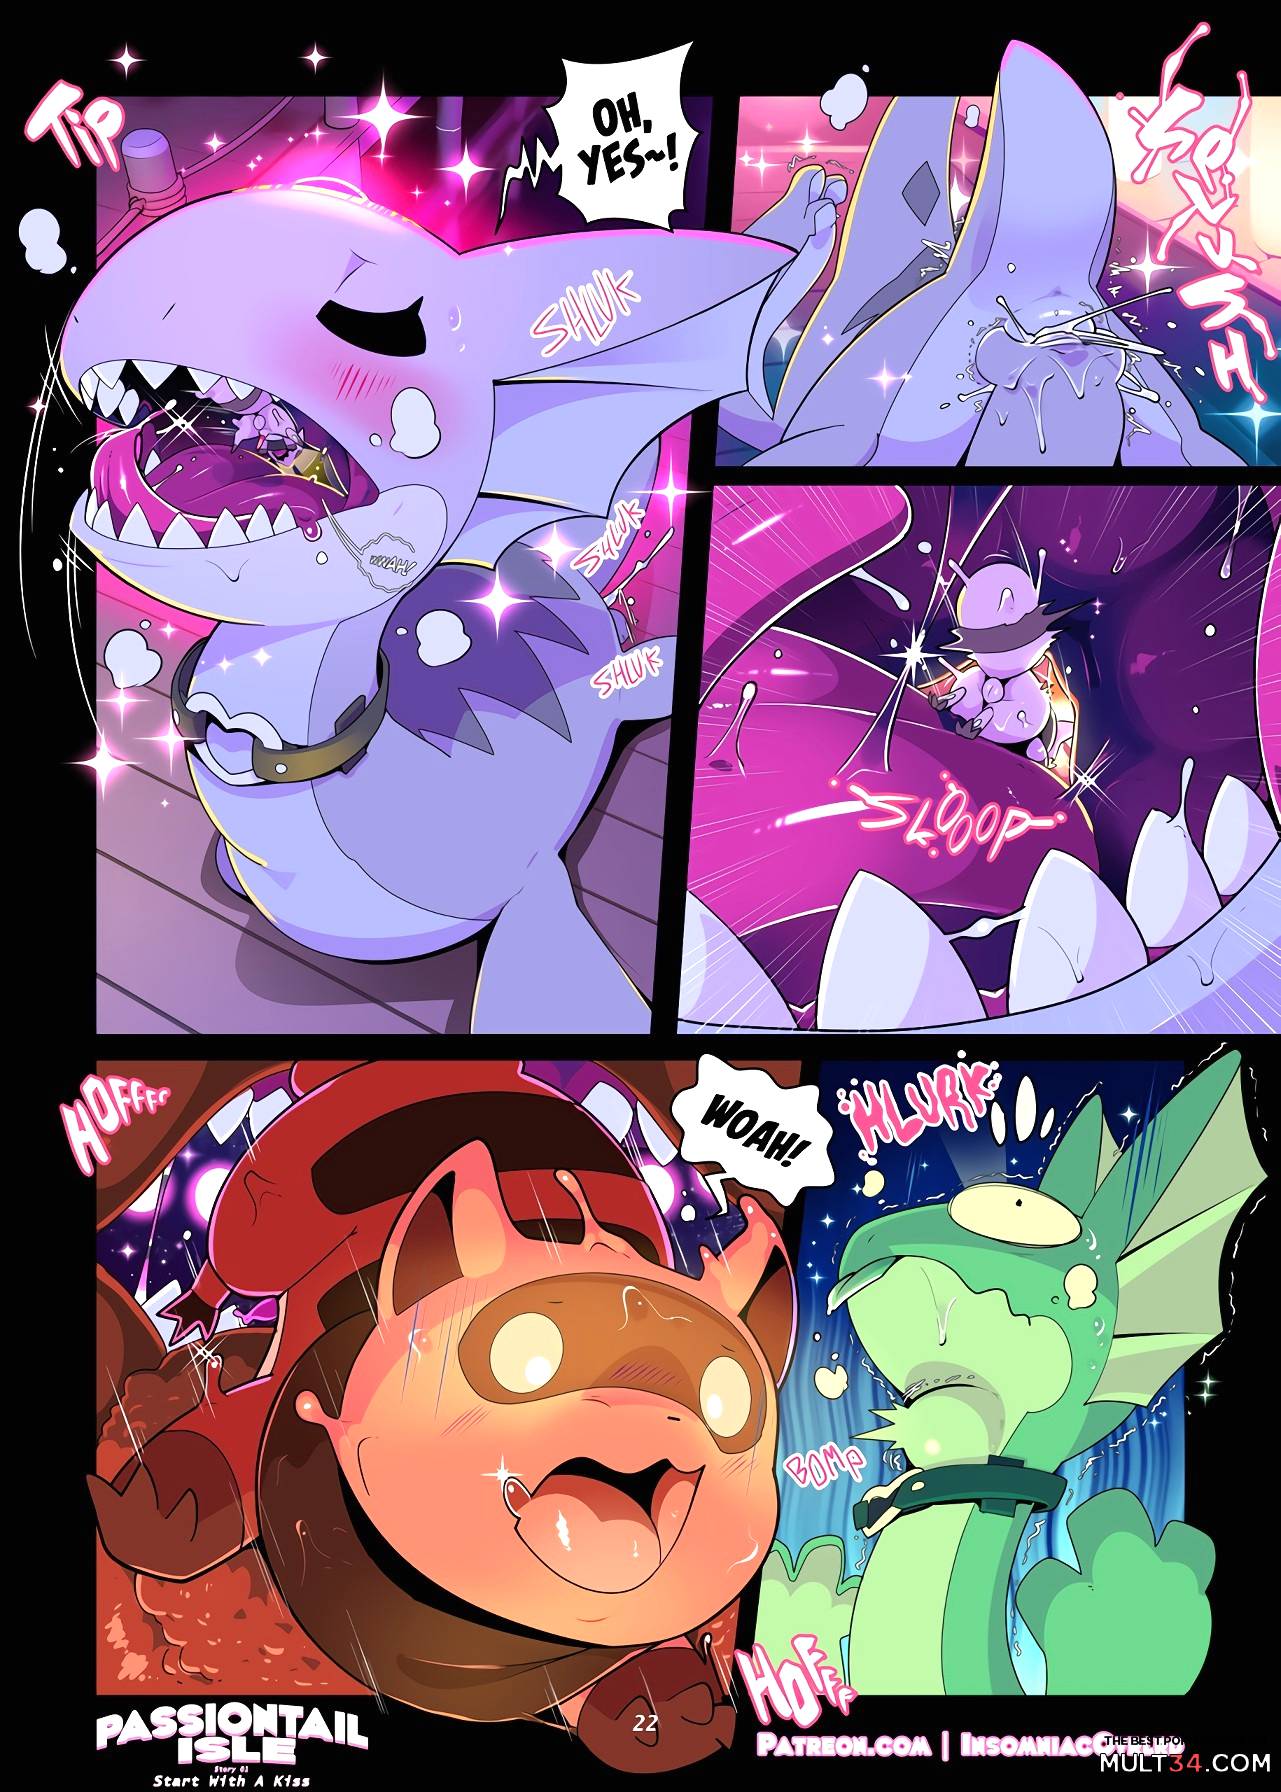 Passiontail Isle by Insomniacovrlrd page 24